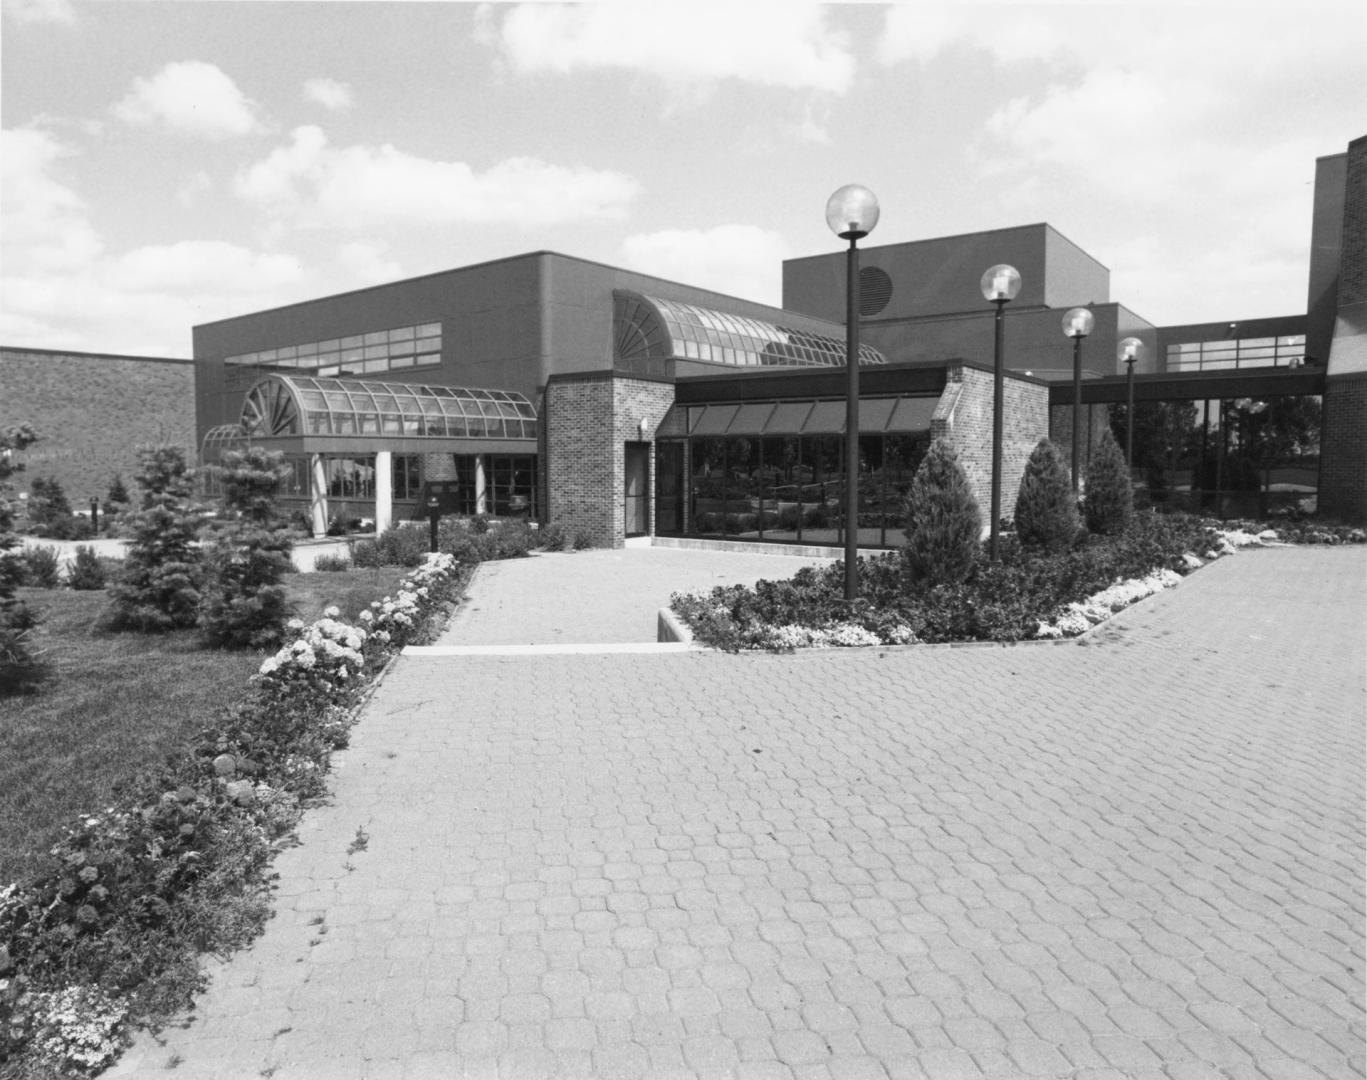 The Canadian Automotive Institute located at Georgian College. Barrie, Ontario